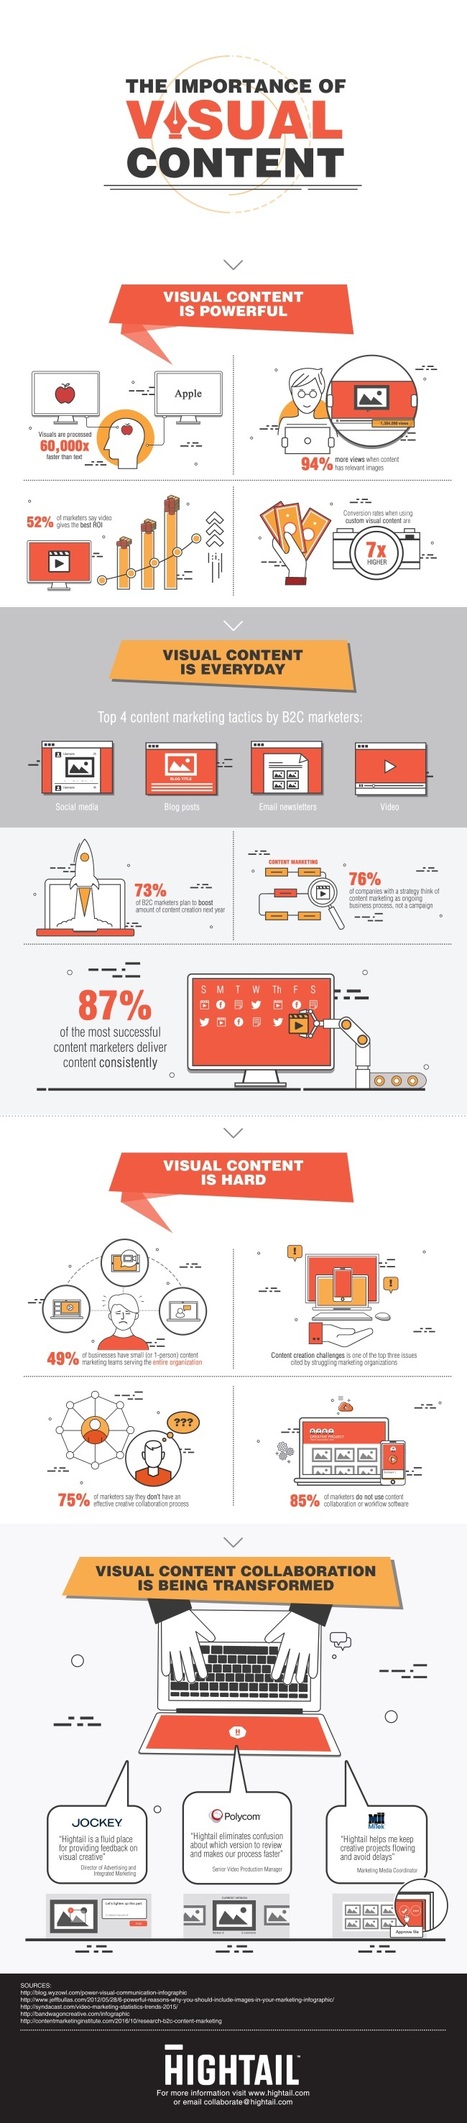 Video Is Increasingly Important in Content Marketing #Infographic | Business Improvement and Social media | Scoop.it